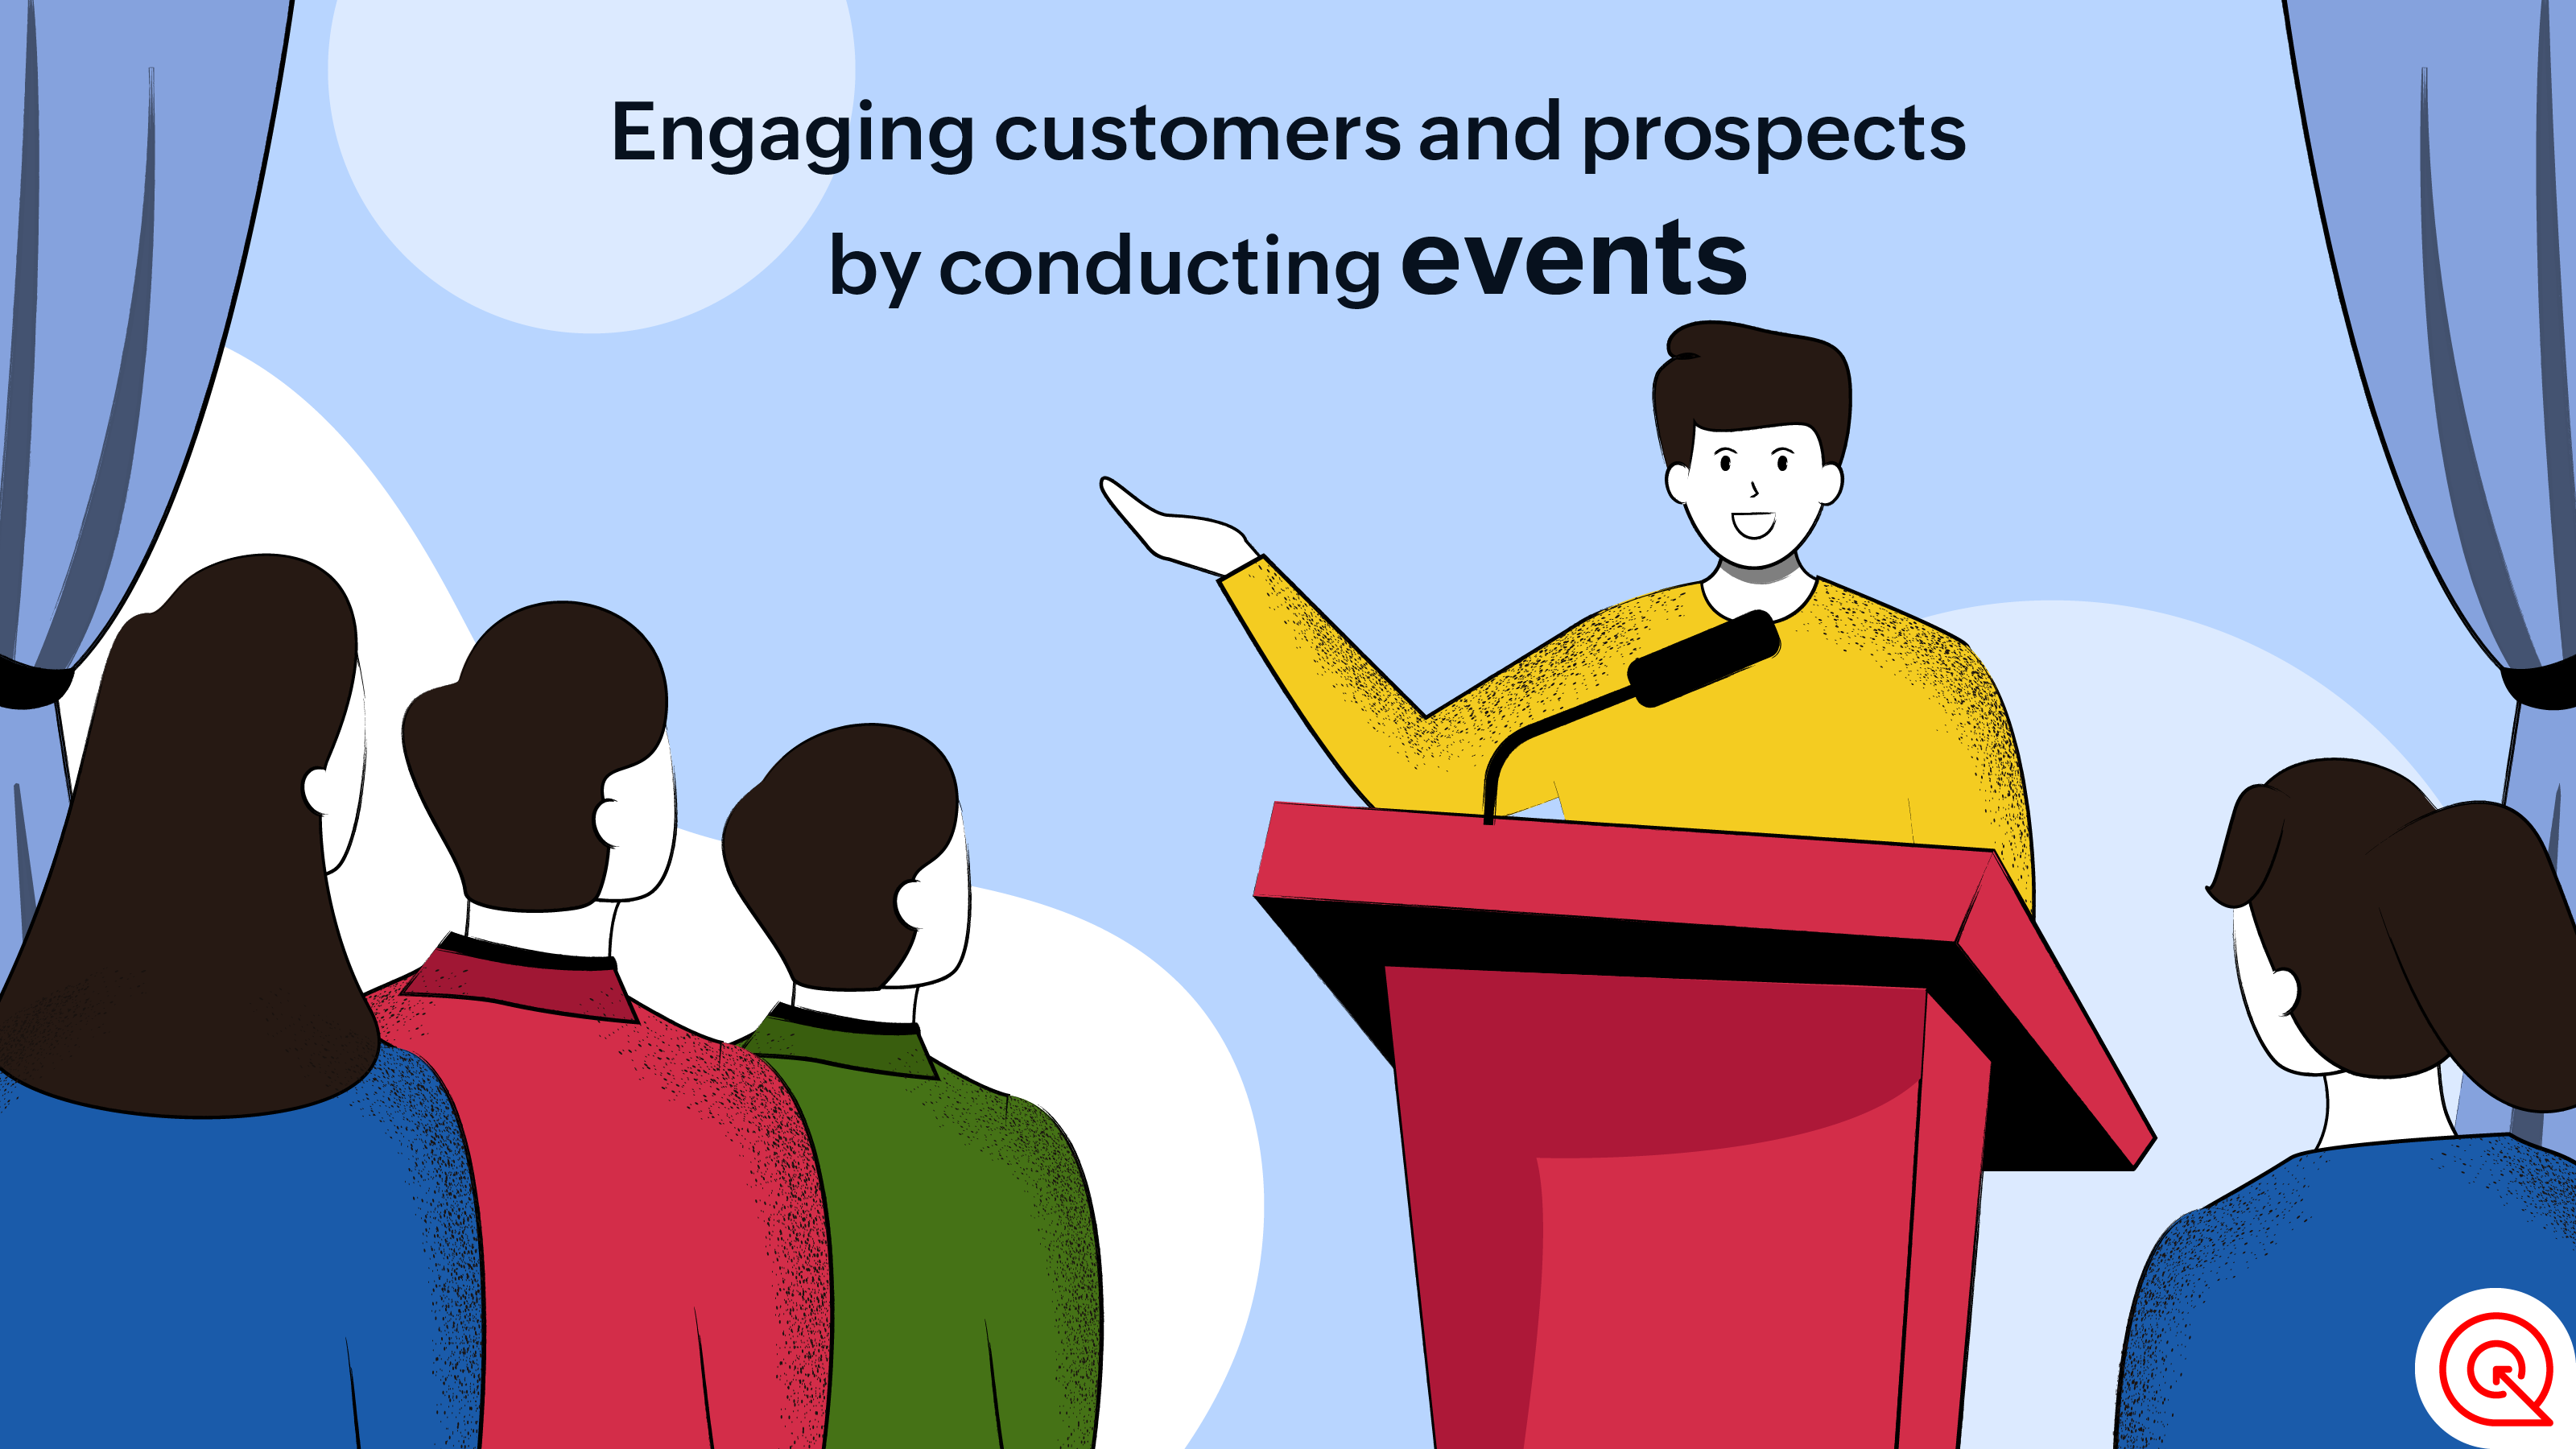 Engaging customers and prospects by conducting events